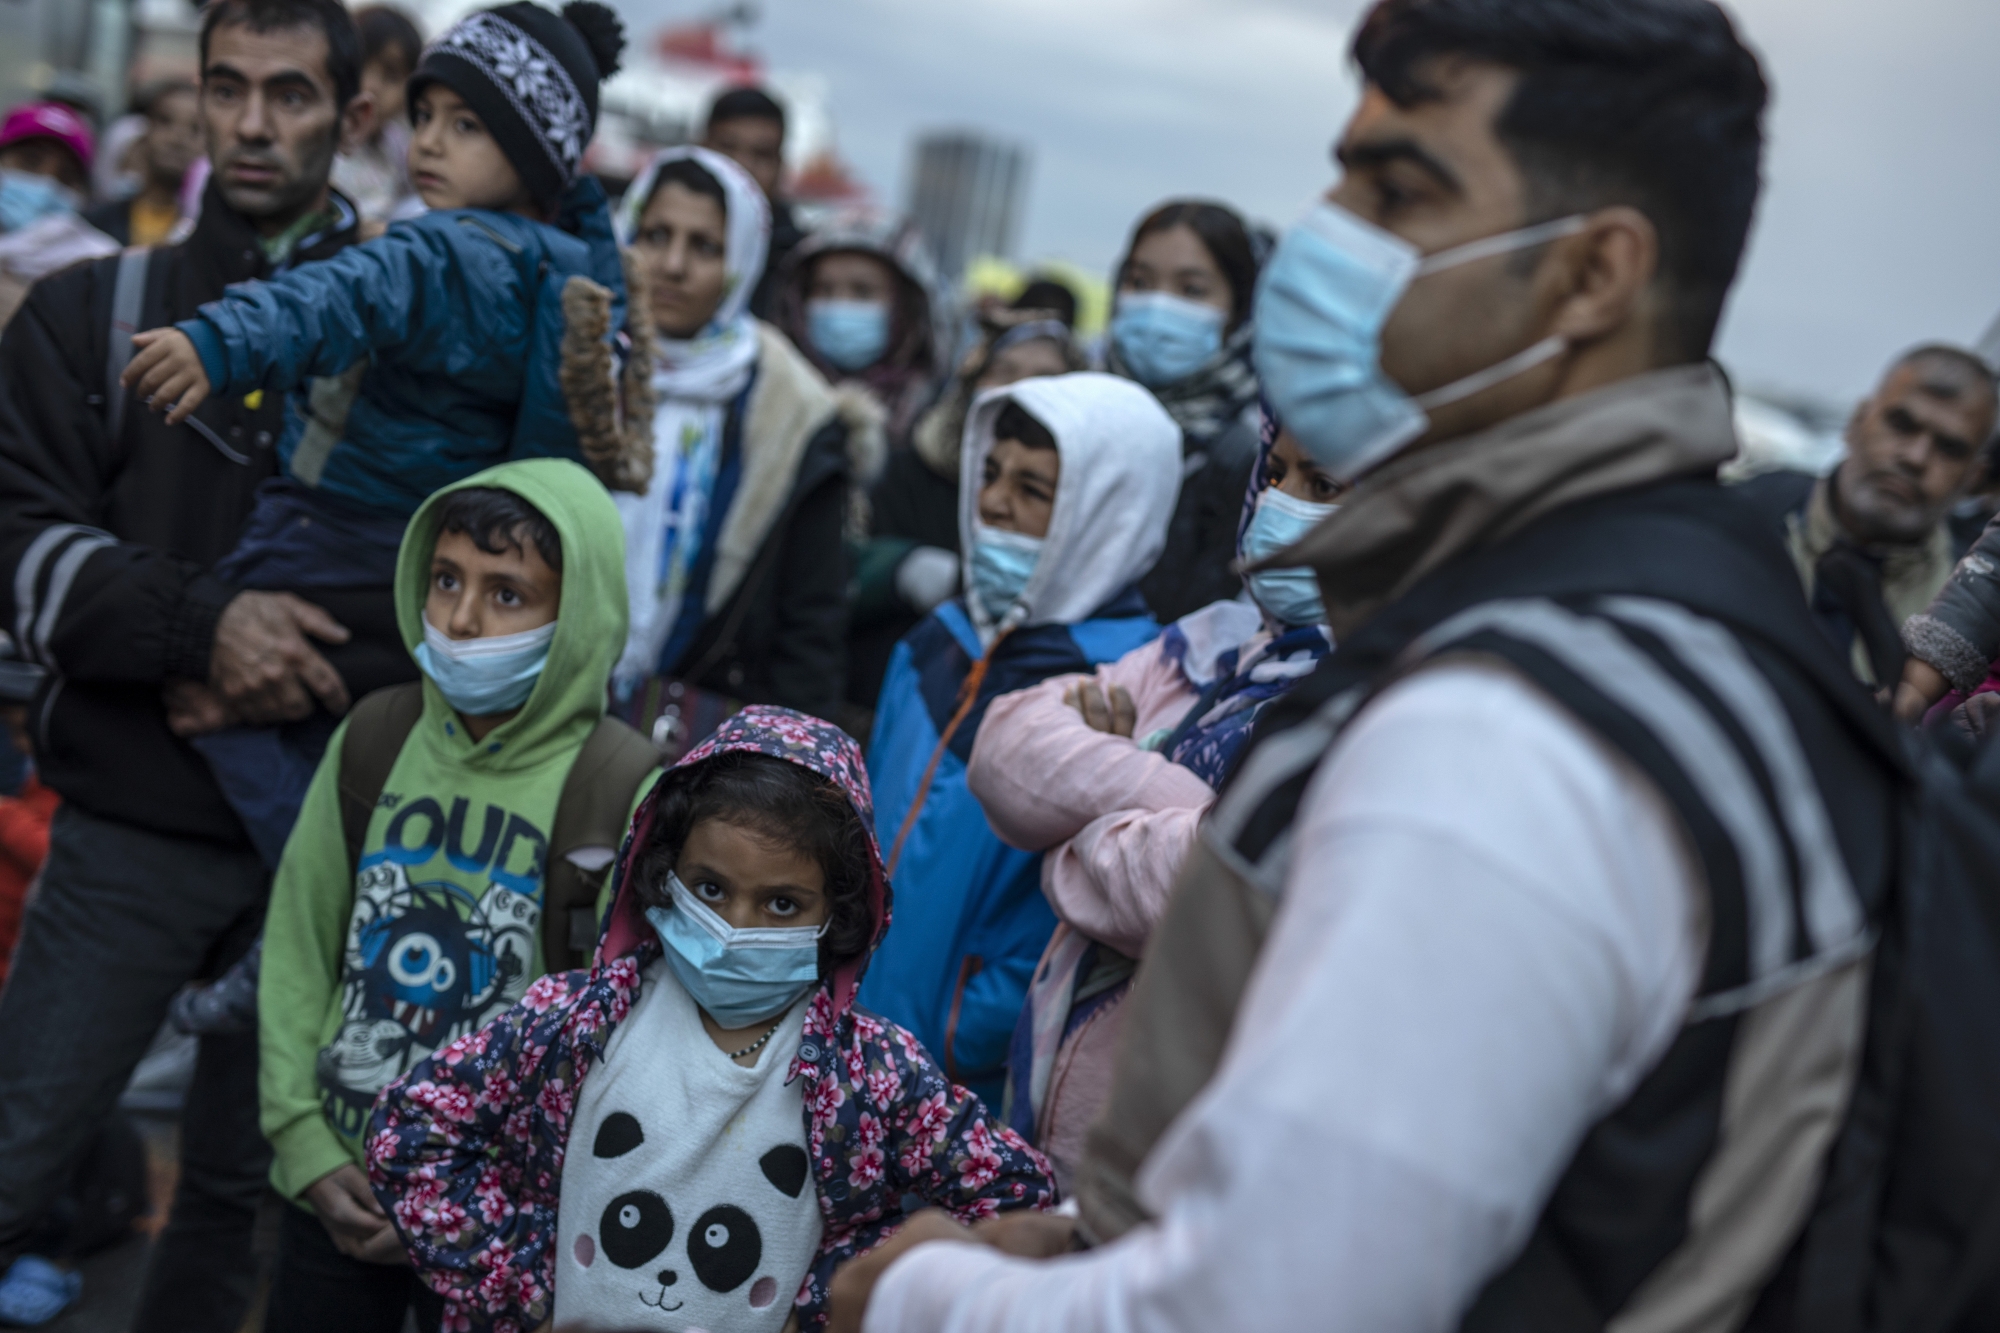 Refugees and migrants wearing masks to prevent the spread off the coronavirus, wait to get on a bus after their arrival at the port of Piraeus , near Athens, on Monday, May 4, 2020. Greek authorities are moving 400 migrants, mostly families, to the mainland to help ease overcrowded conditions at the camp Moria in Lesbos island. (AP Photo/Petros Giannakouris)
ArcInfo